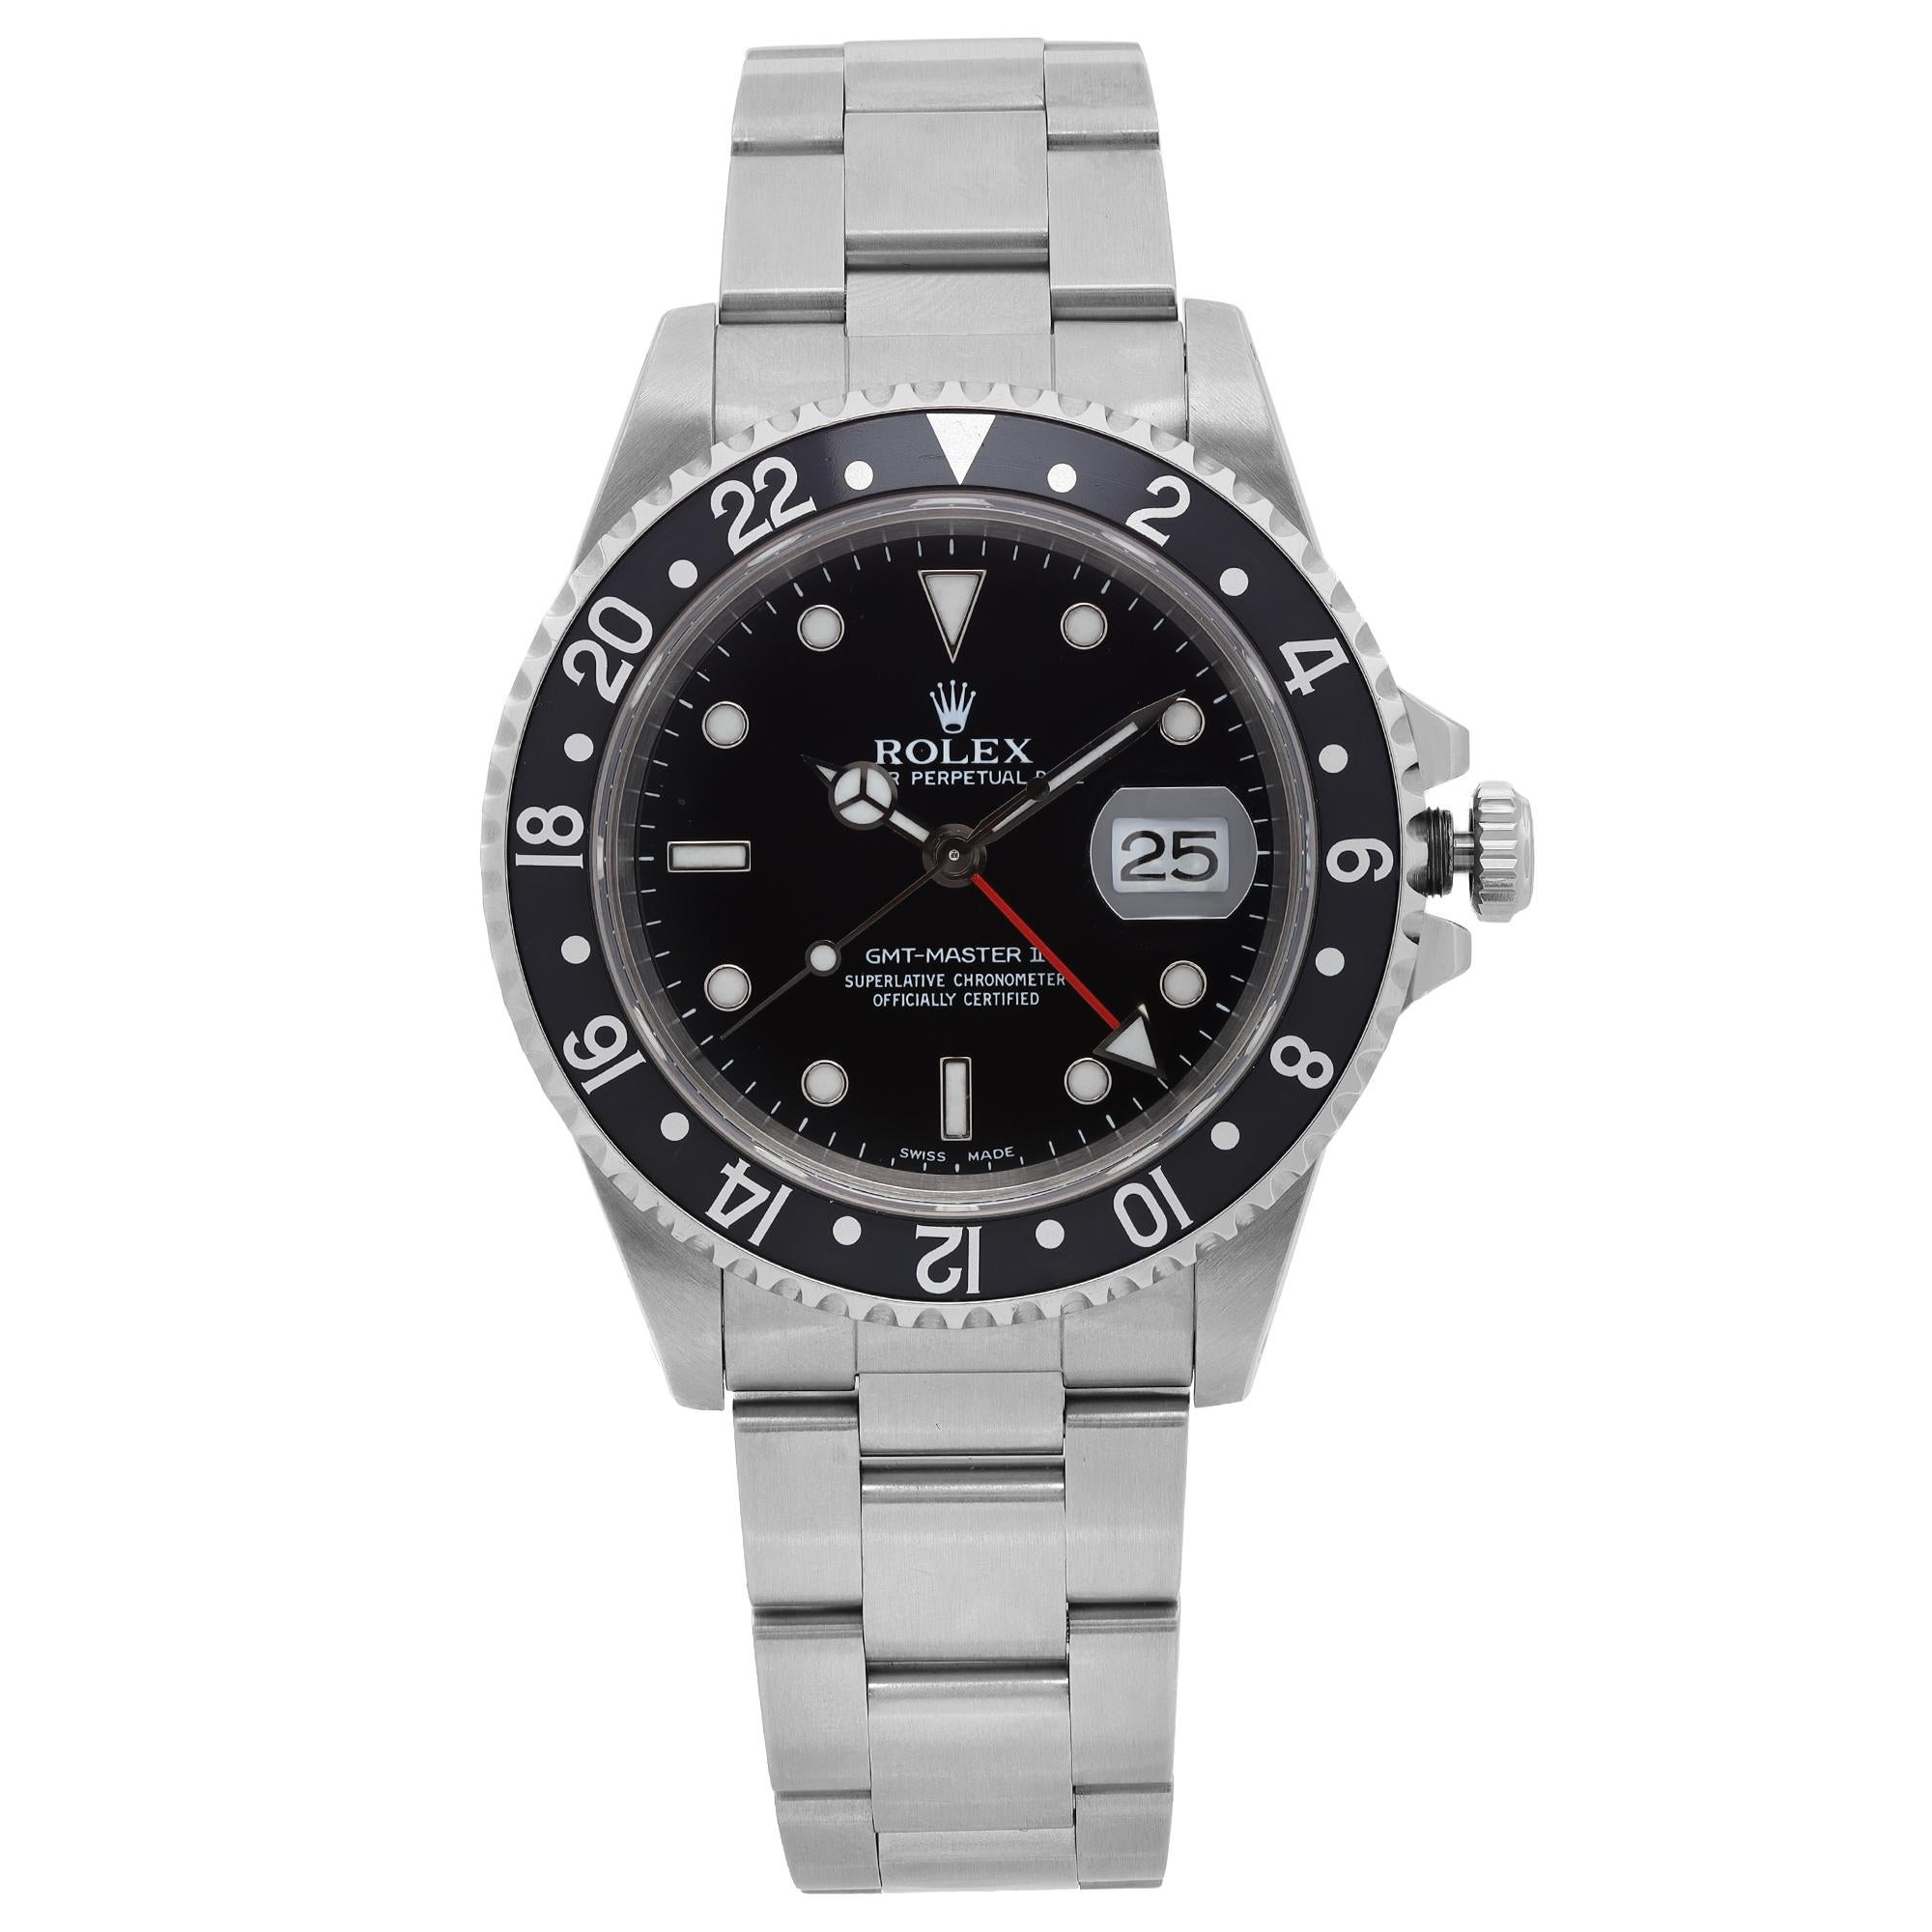 Rolex GMT-Master II Stainless Steel Black Dial Automatic Men watch 16710 B/P For Sale